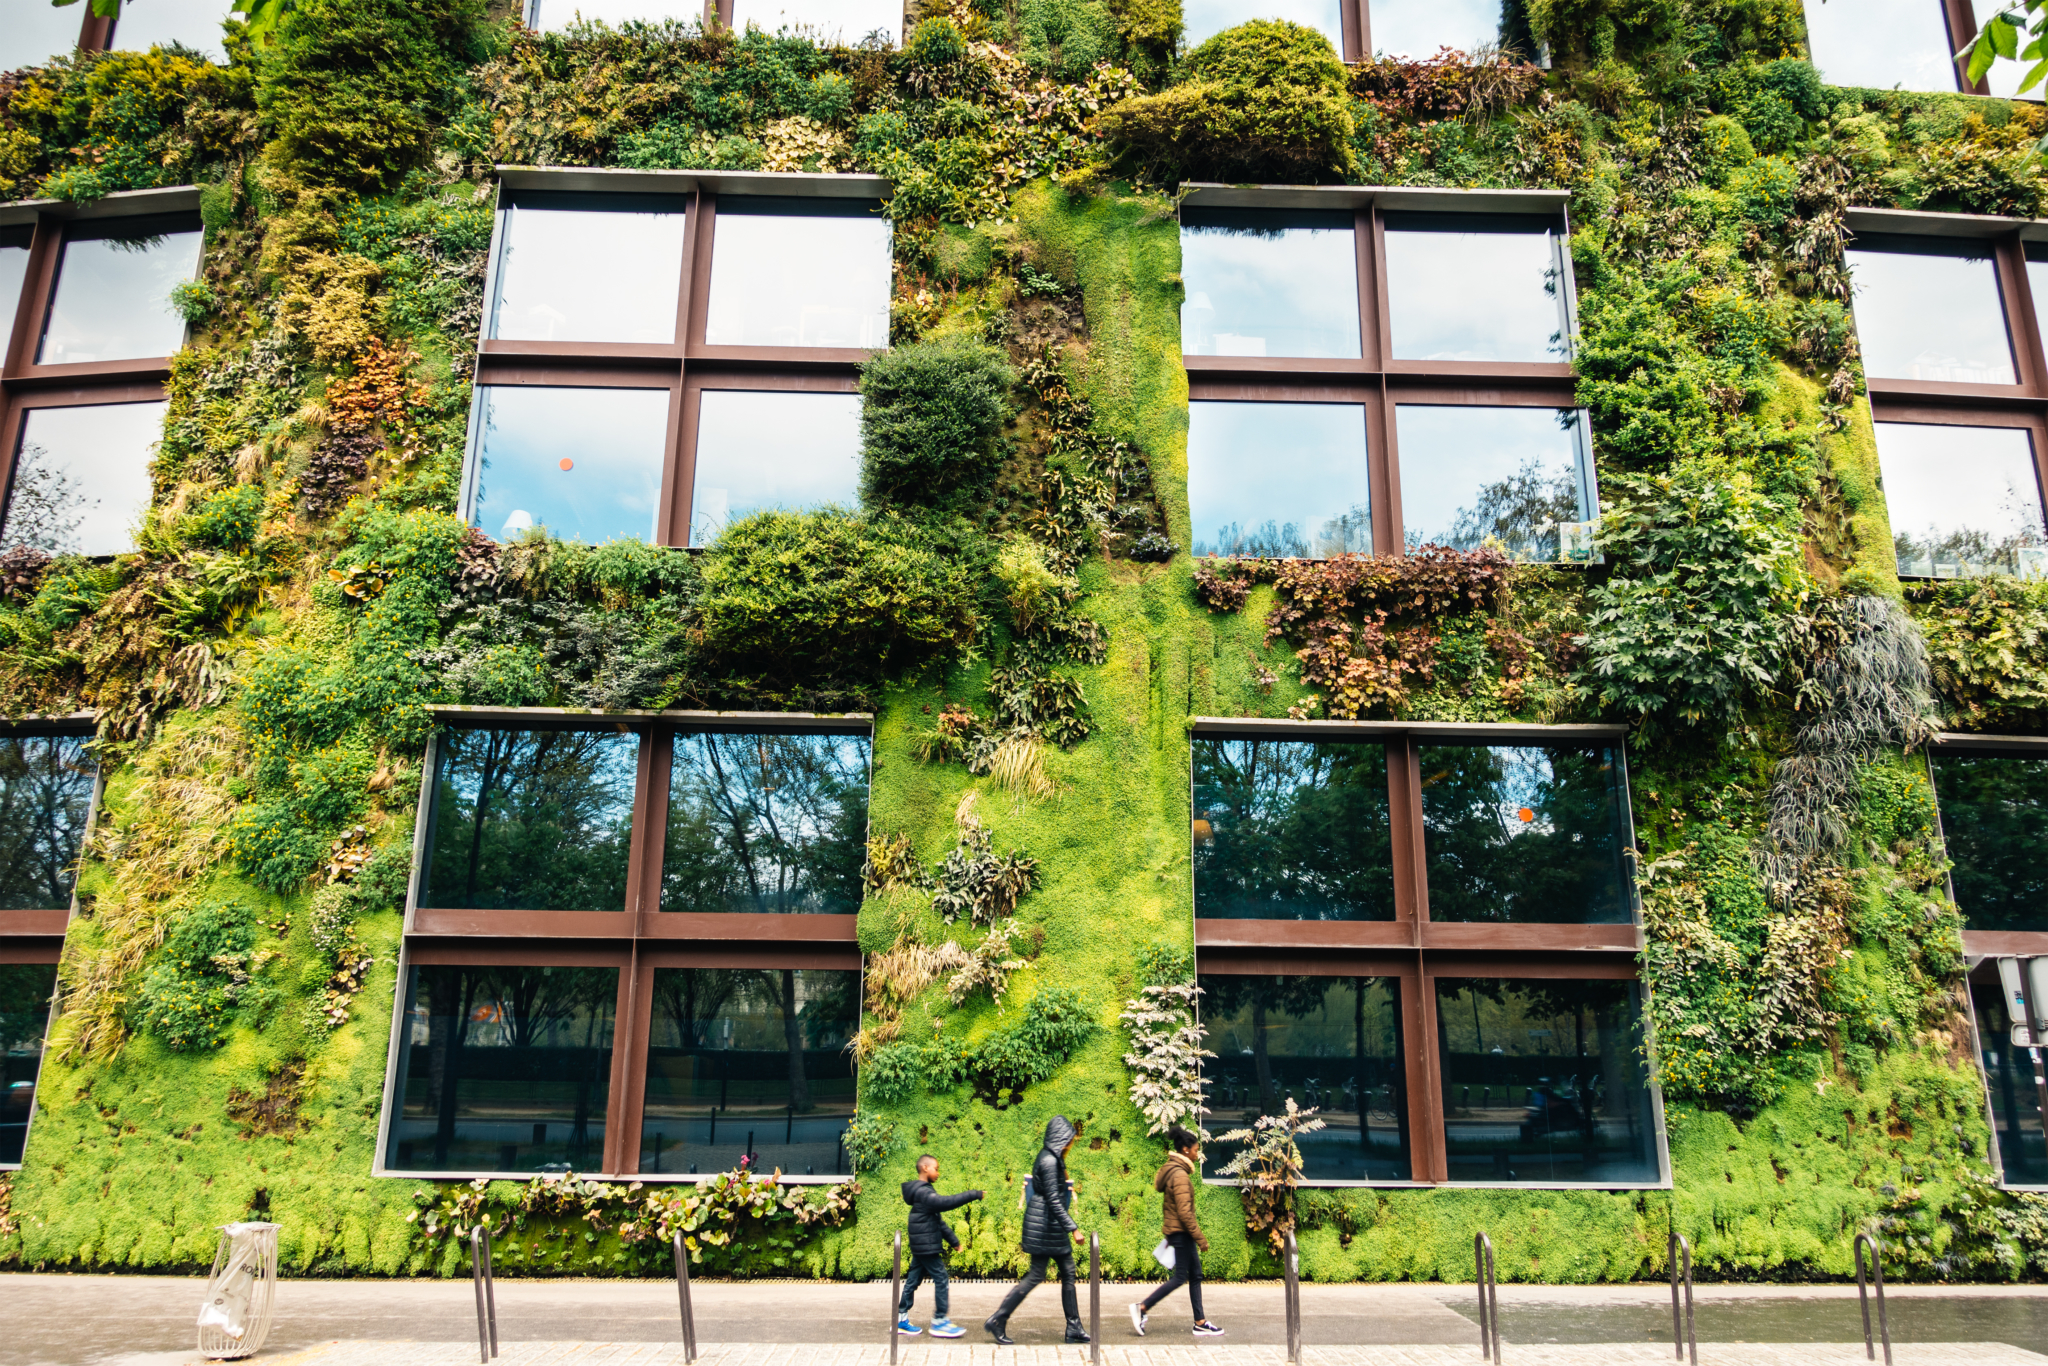 Chapman Taylor | The key trends and benefits of biophilic design